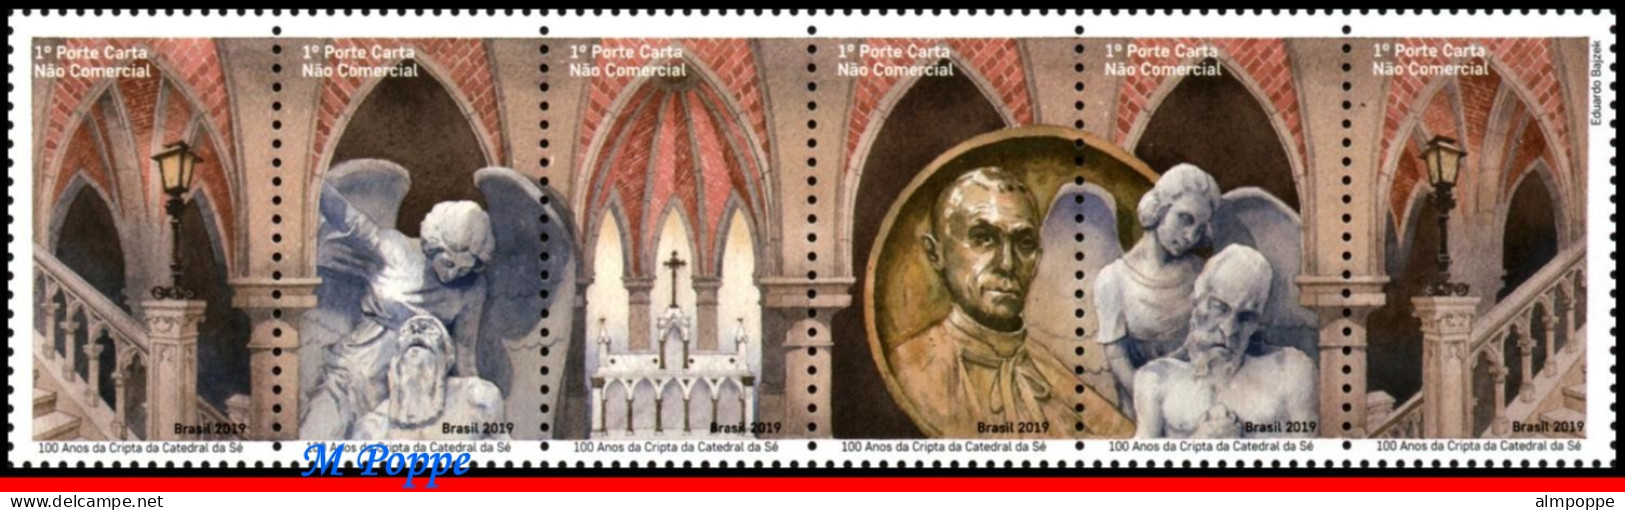 Ref. BR-V2019-20-F BRAZIL 2019 - CRYPT OF SEE CATHEDRAL,ART, RELIGION, SCULTURES, SHEET MNH, CHURCHES 12V - Blocs-feuillets